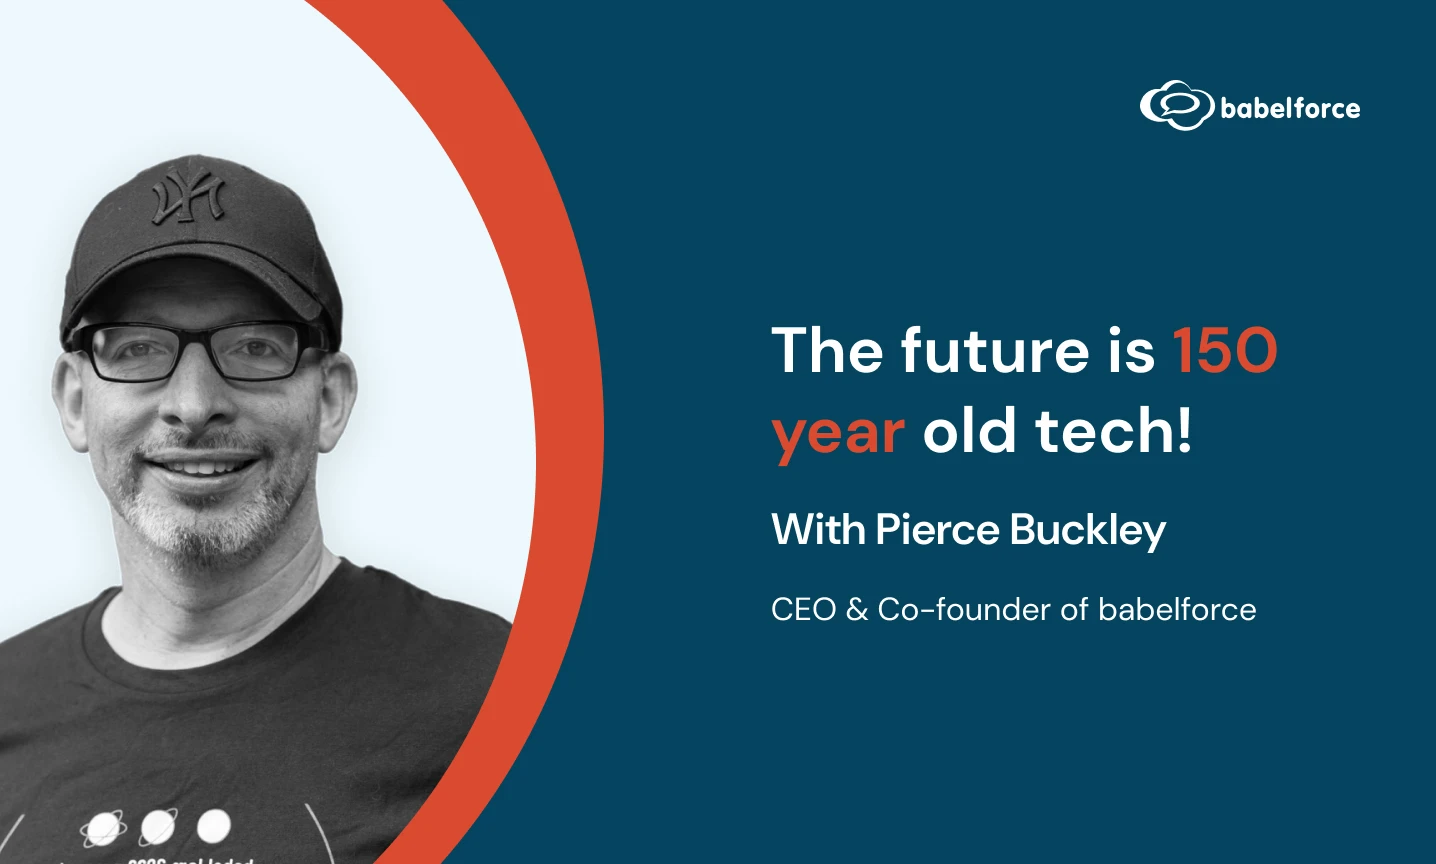 The future is in 150 year old tech!